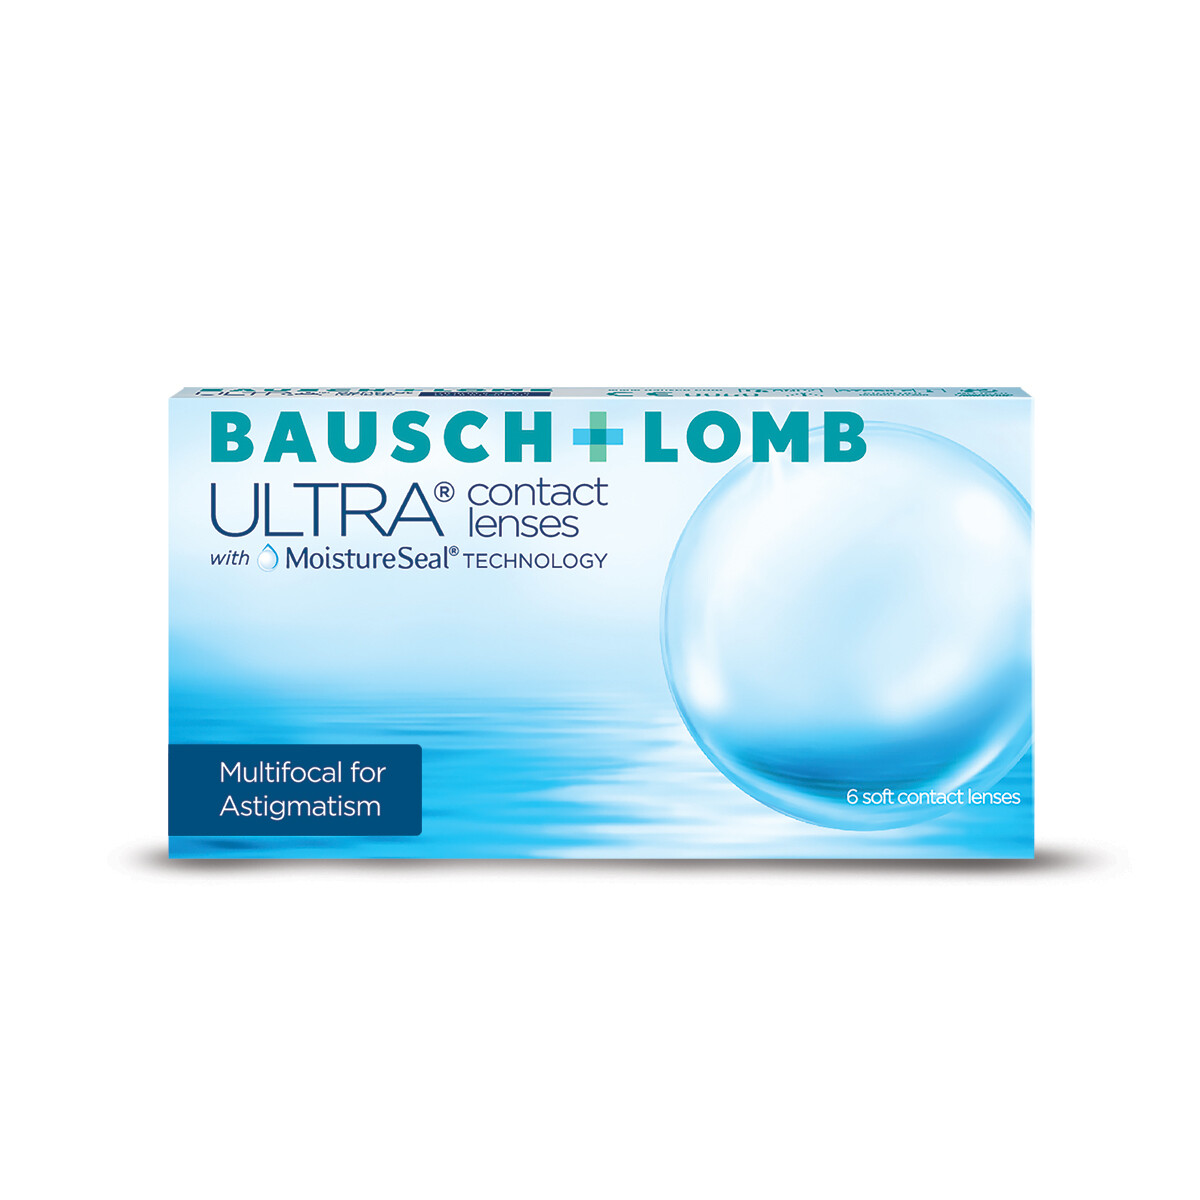 Bausch + Lomb Ultra Multifocal for Astigmatism